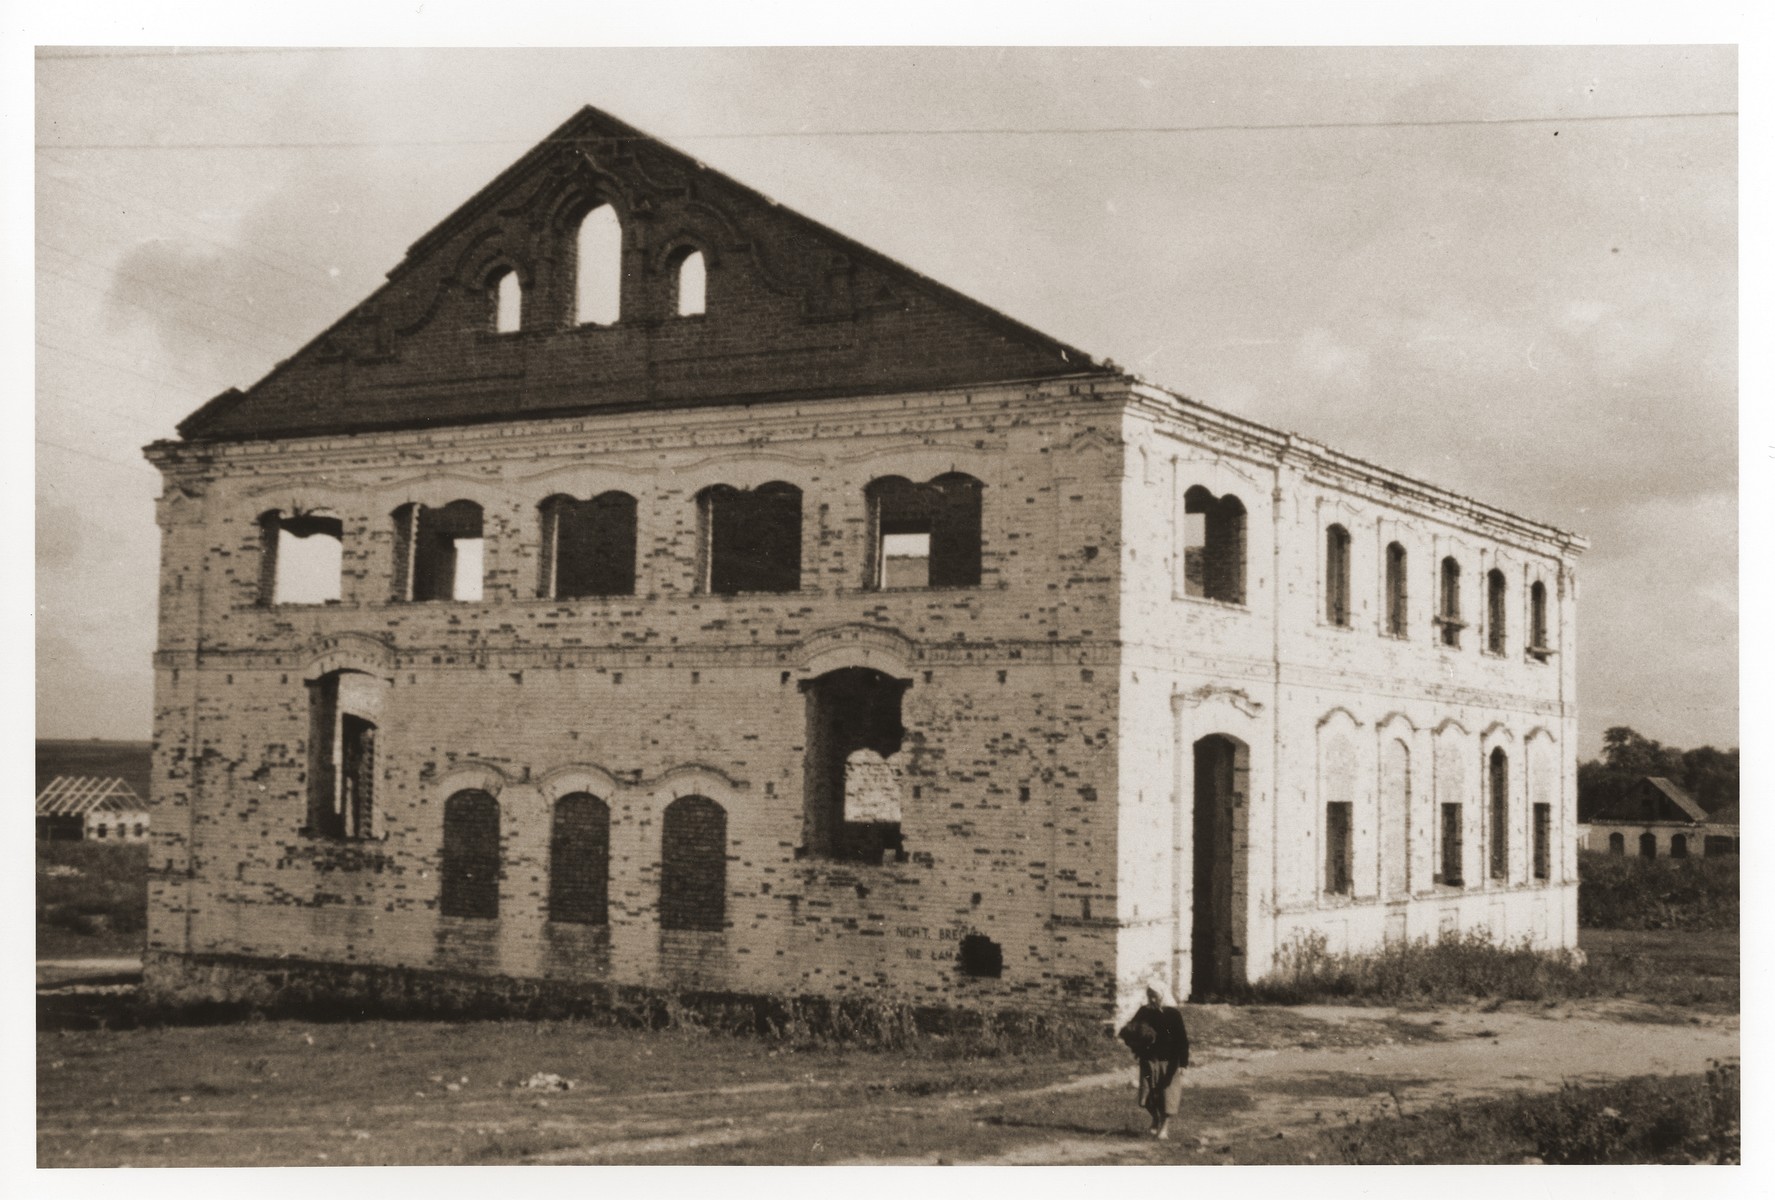 Exterior of the destroyed synagogue of Mir.